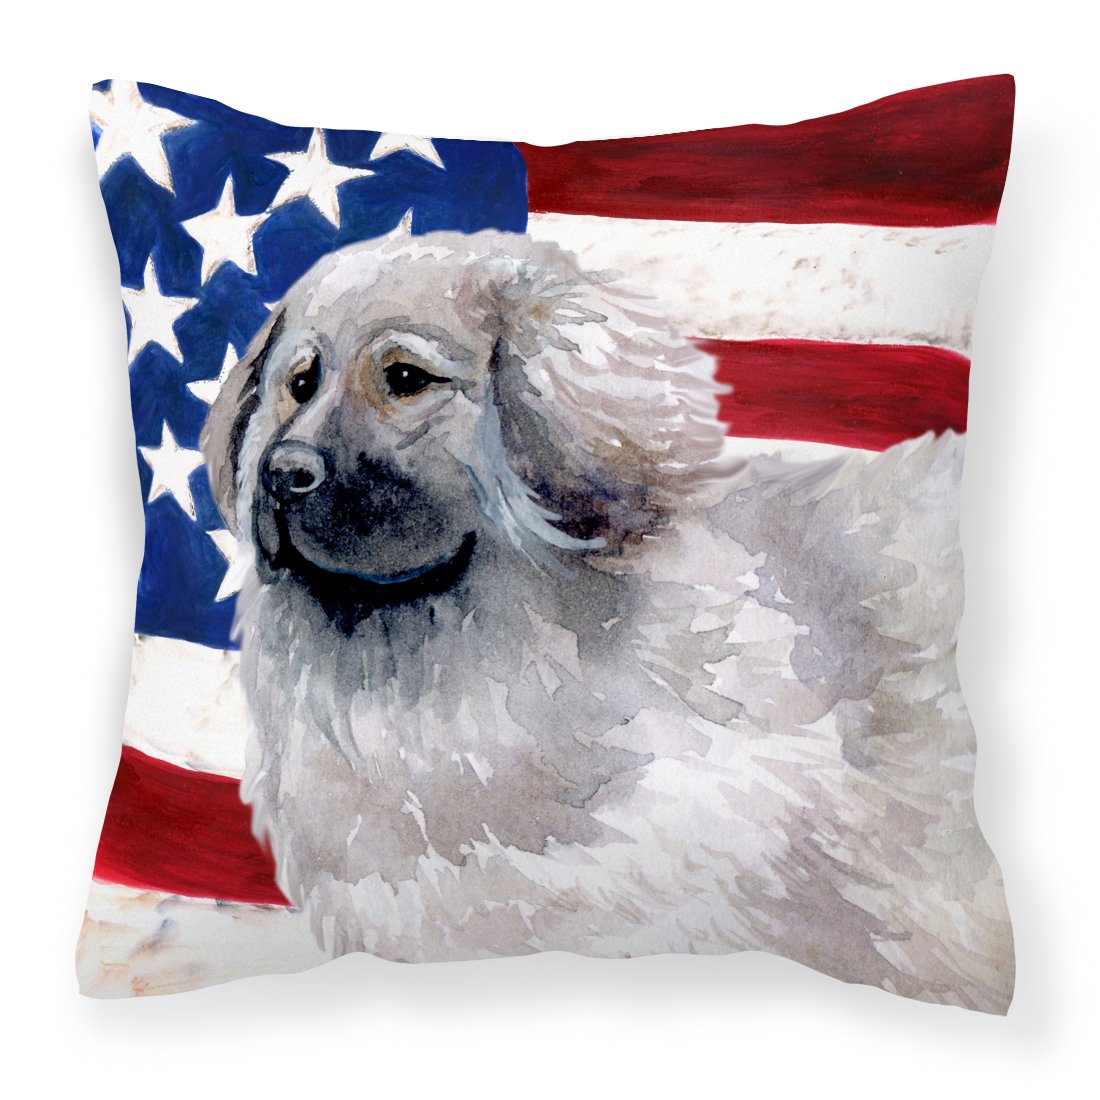 Moscow Watchdog Patriotic Fabric Decorative Pillow BB9673PW1818 by Caroline's Treasures